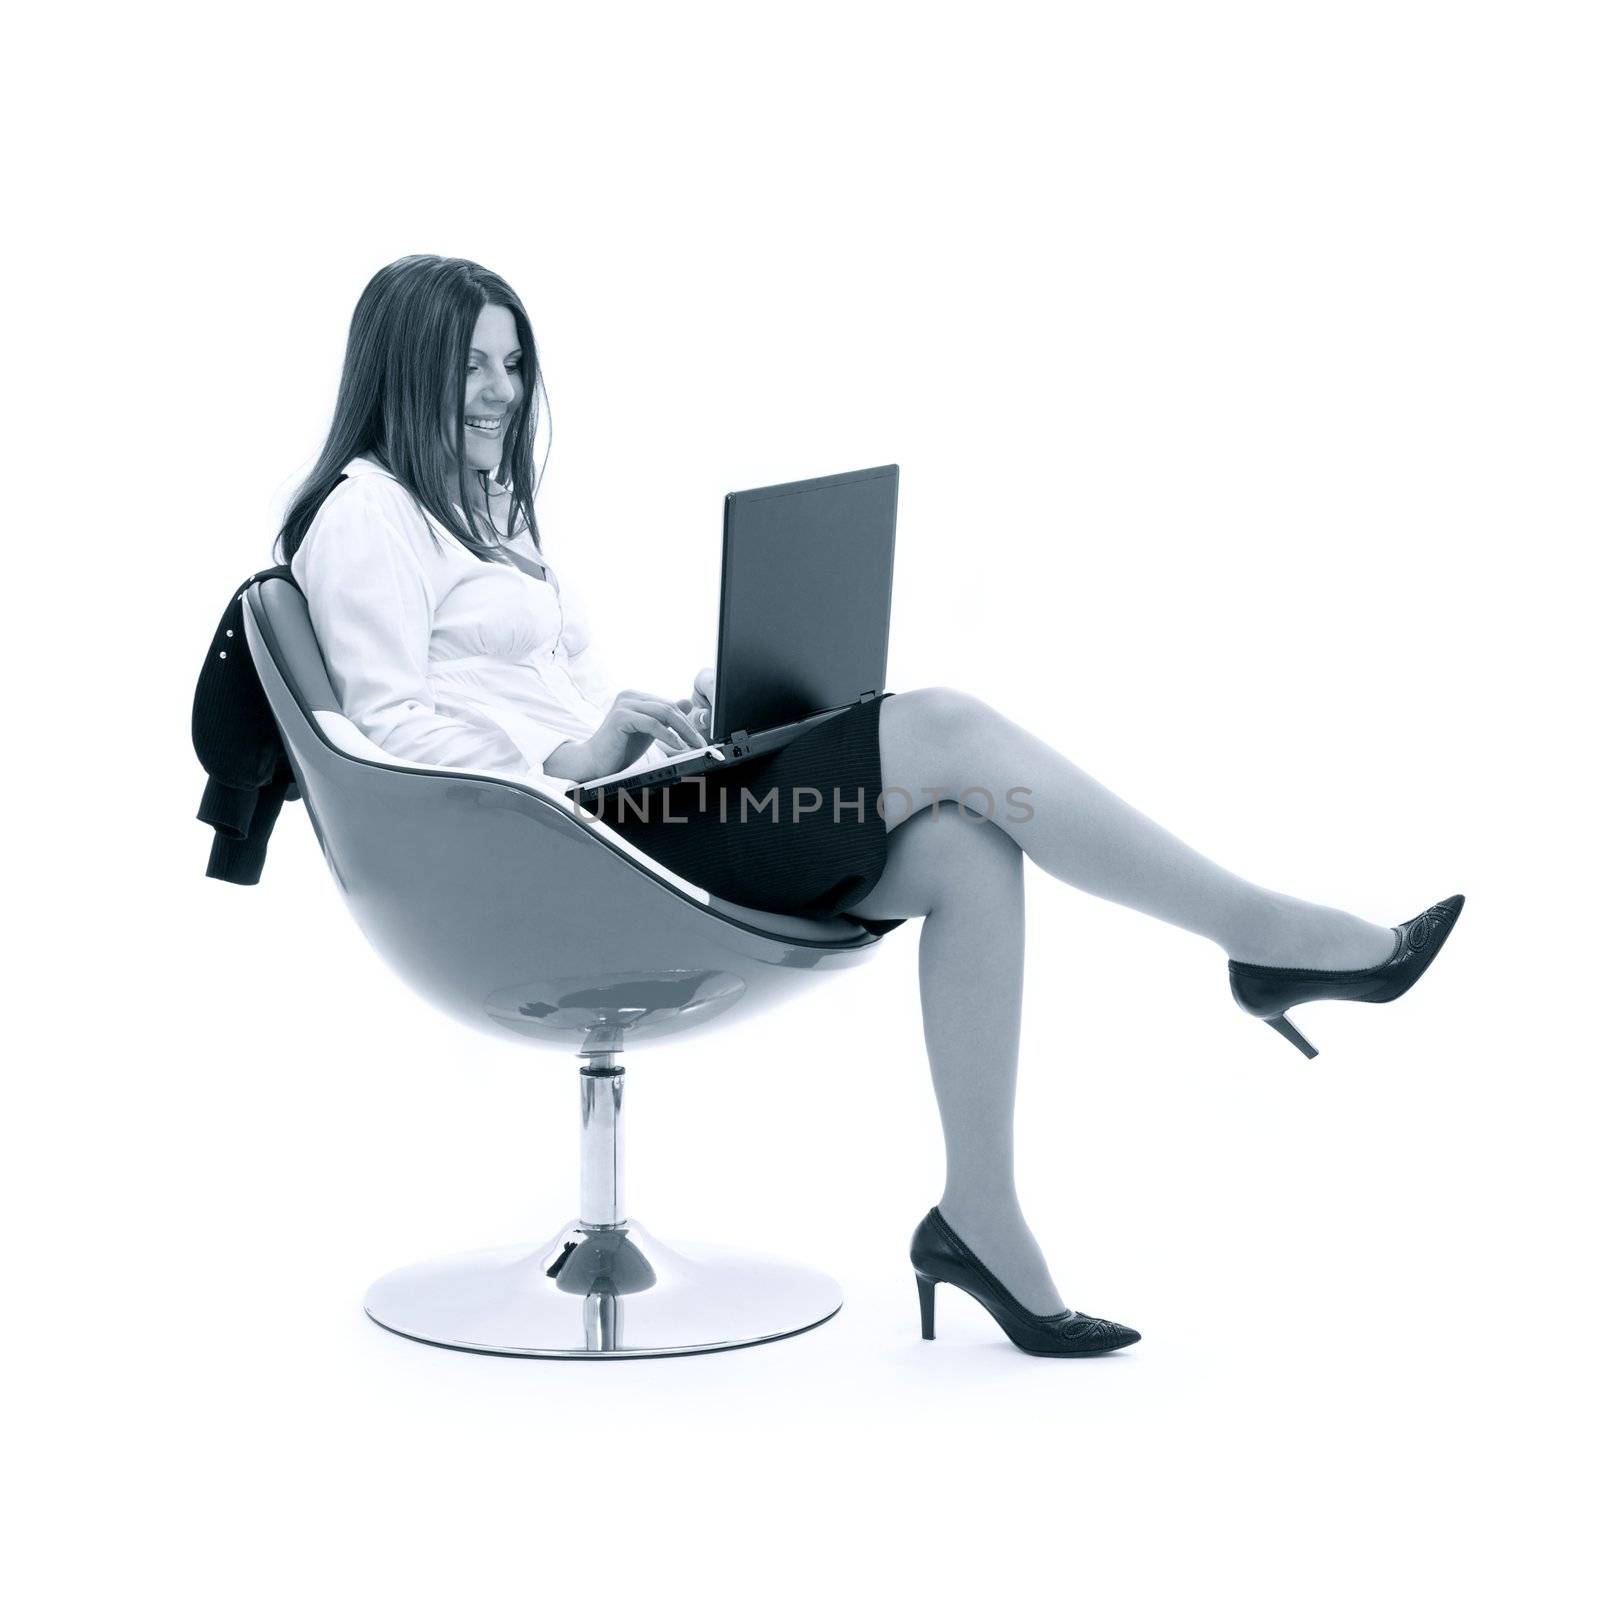 monochrome businesswoman with laptop in chair over white